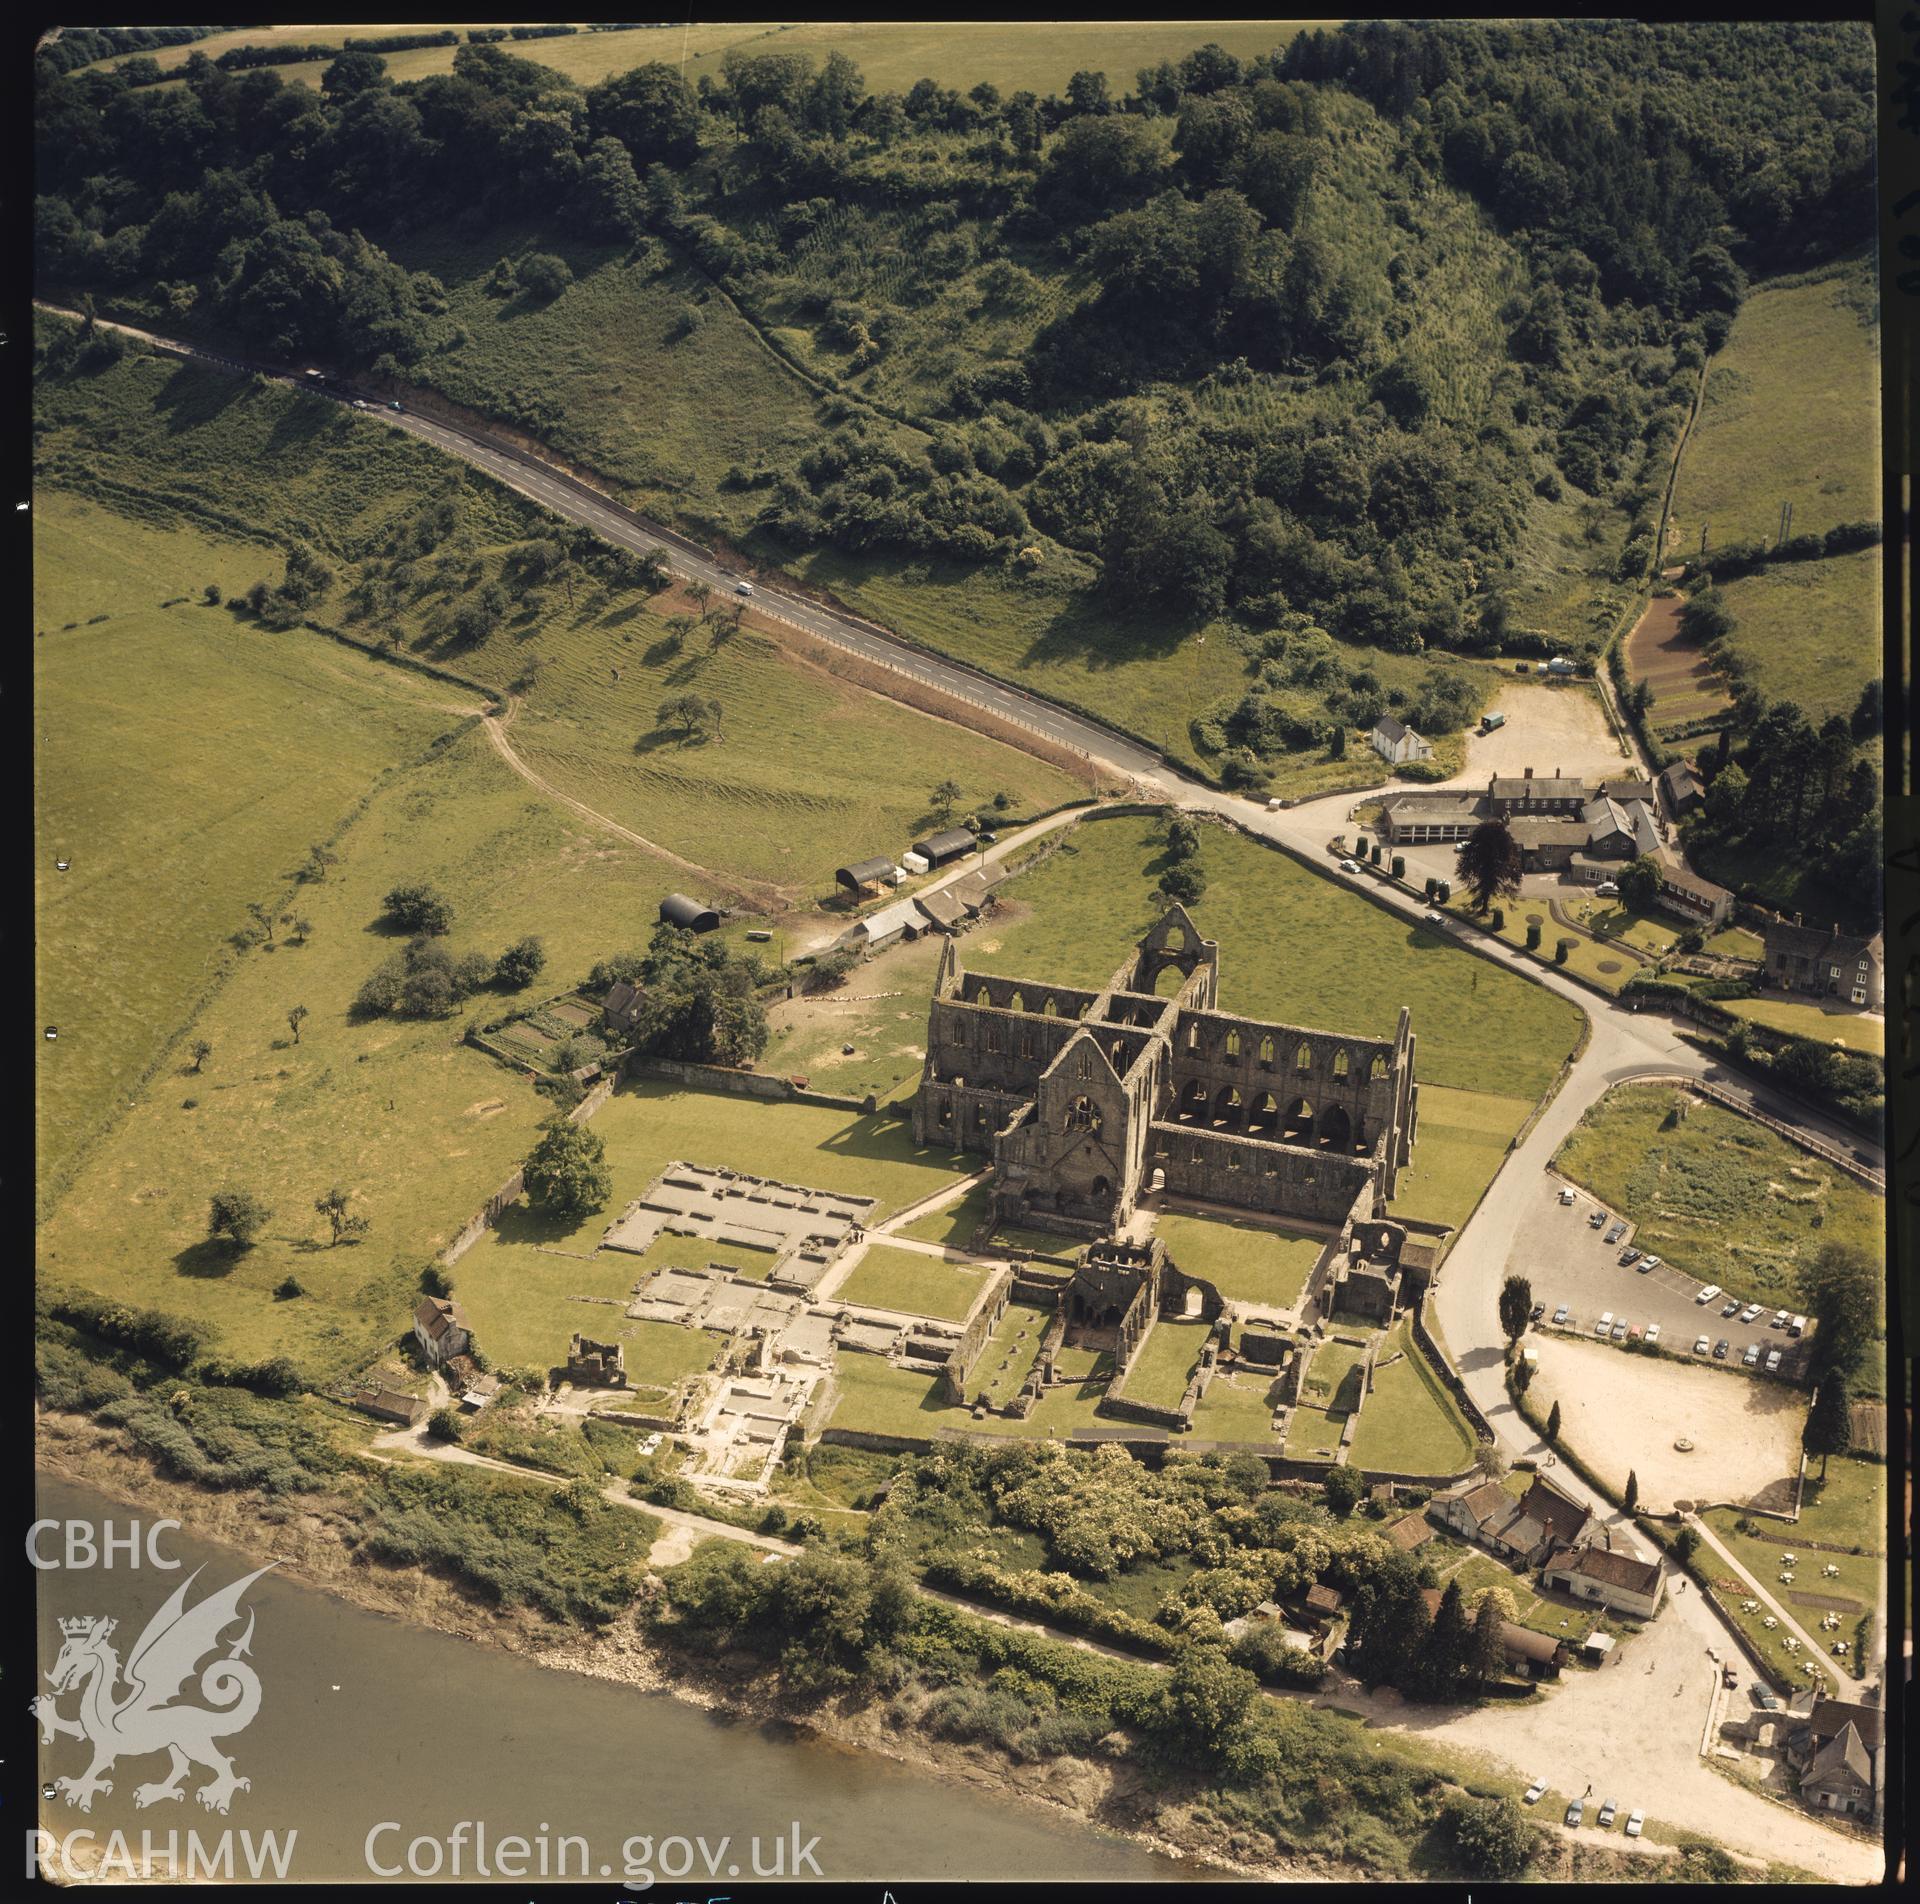 Aerial view of Tintern Abbey.